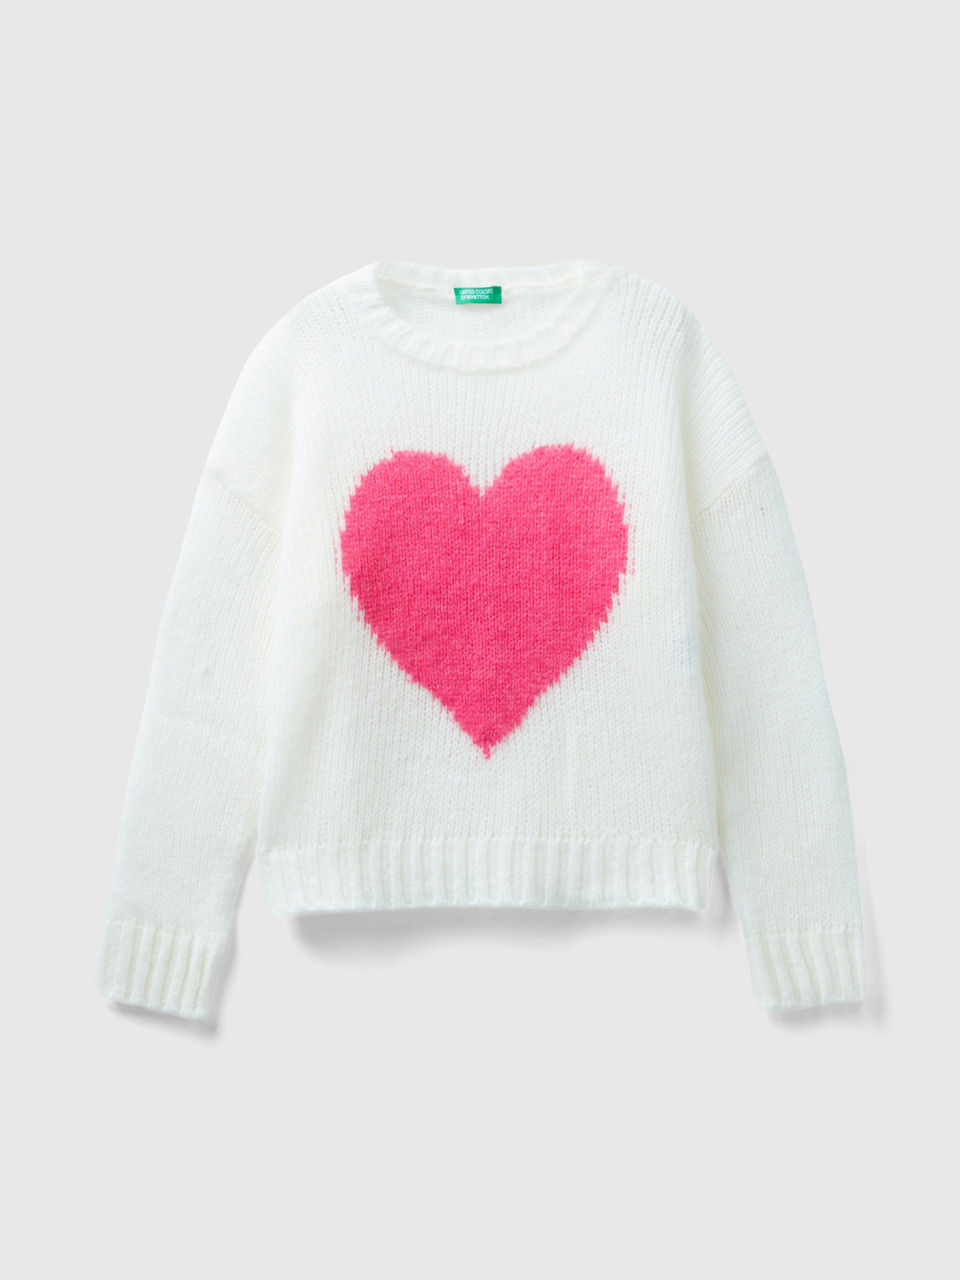 Benetton, Sweater With Heart Inlay, White, Kids